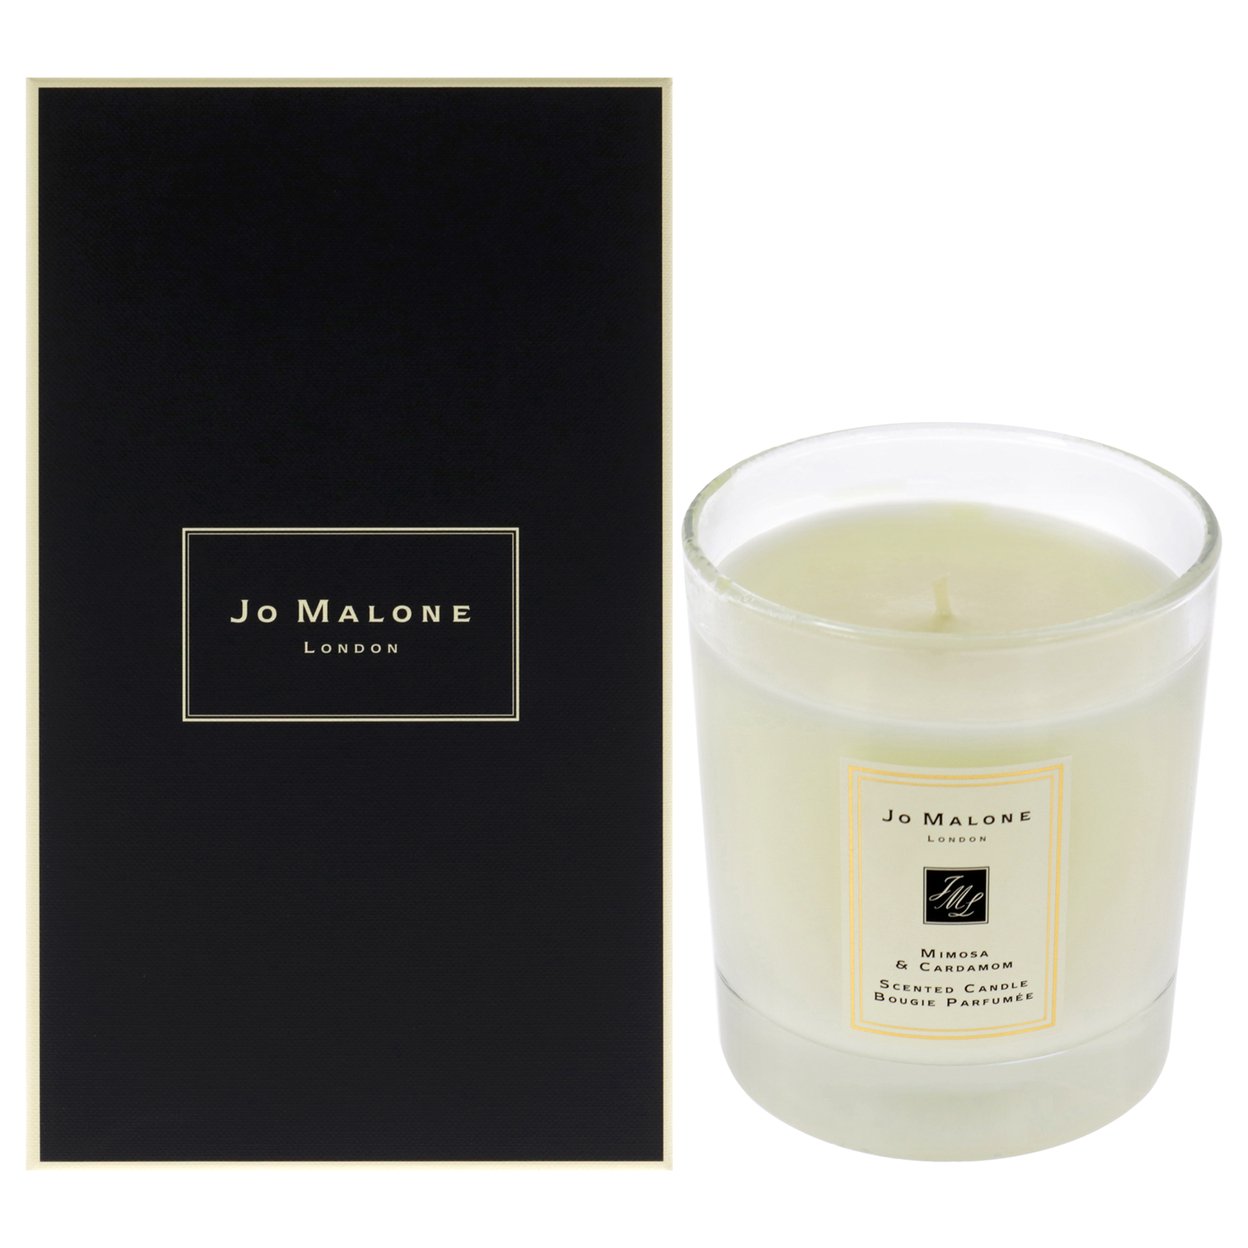 Jo Malone Unisex CANDLES Mimosa And Cardamom Scented Candle 7 Oz